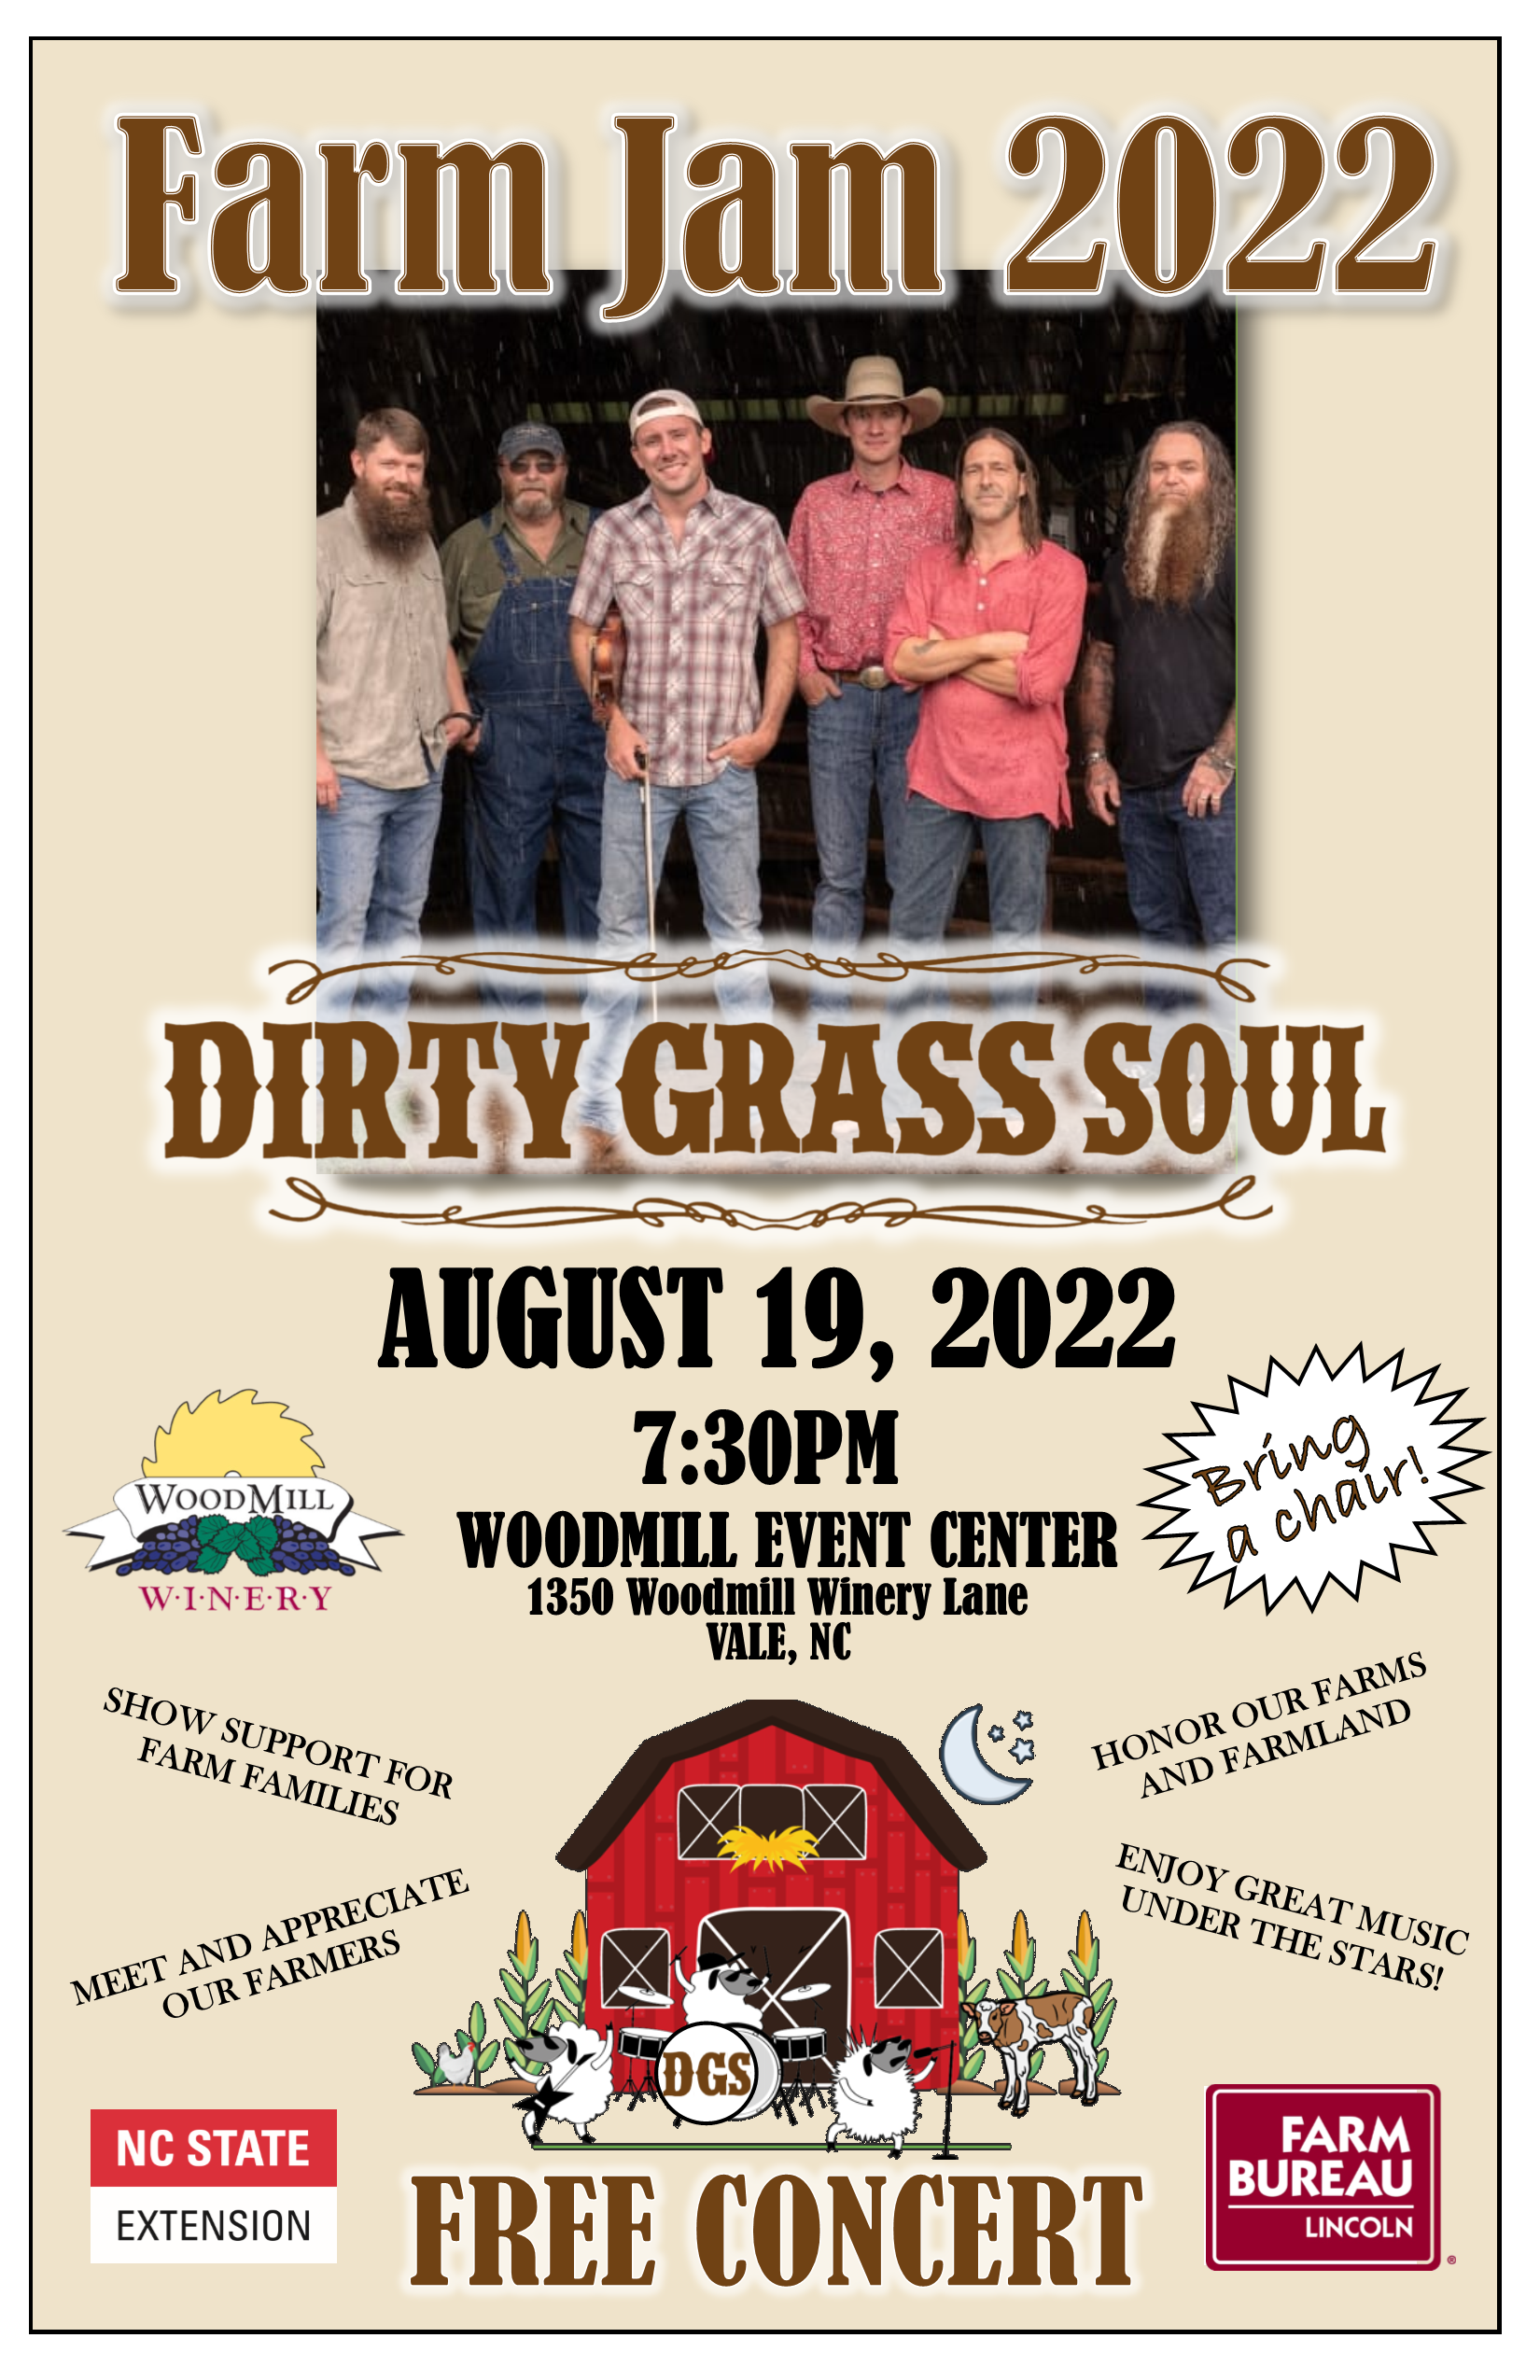 Farm Jam 2022, Dirty Grass Soul, August 19, 2022, 7:30 p.m. Woodmill Event Center, 1350 Woodmill Winery Lane, Vale, NC.